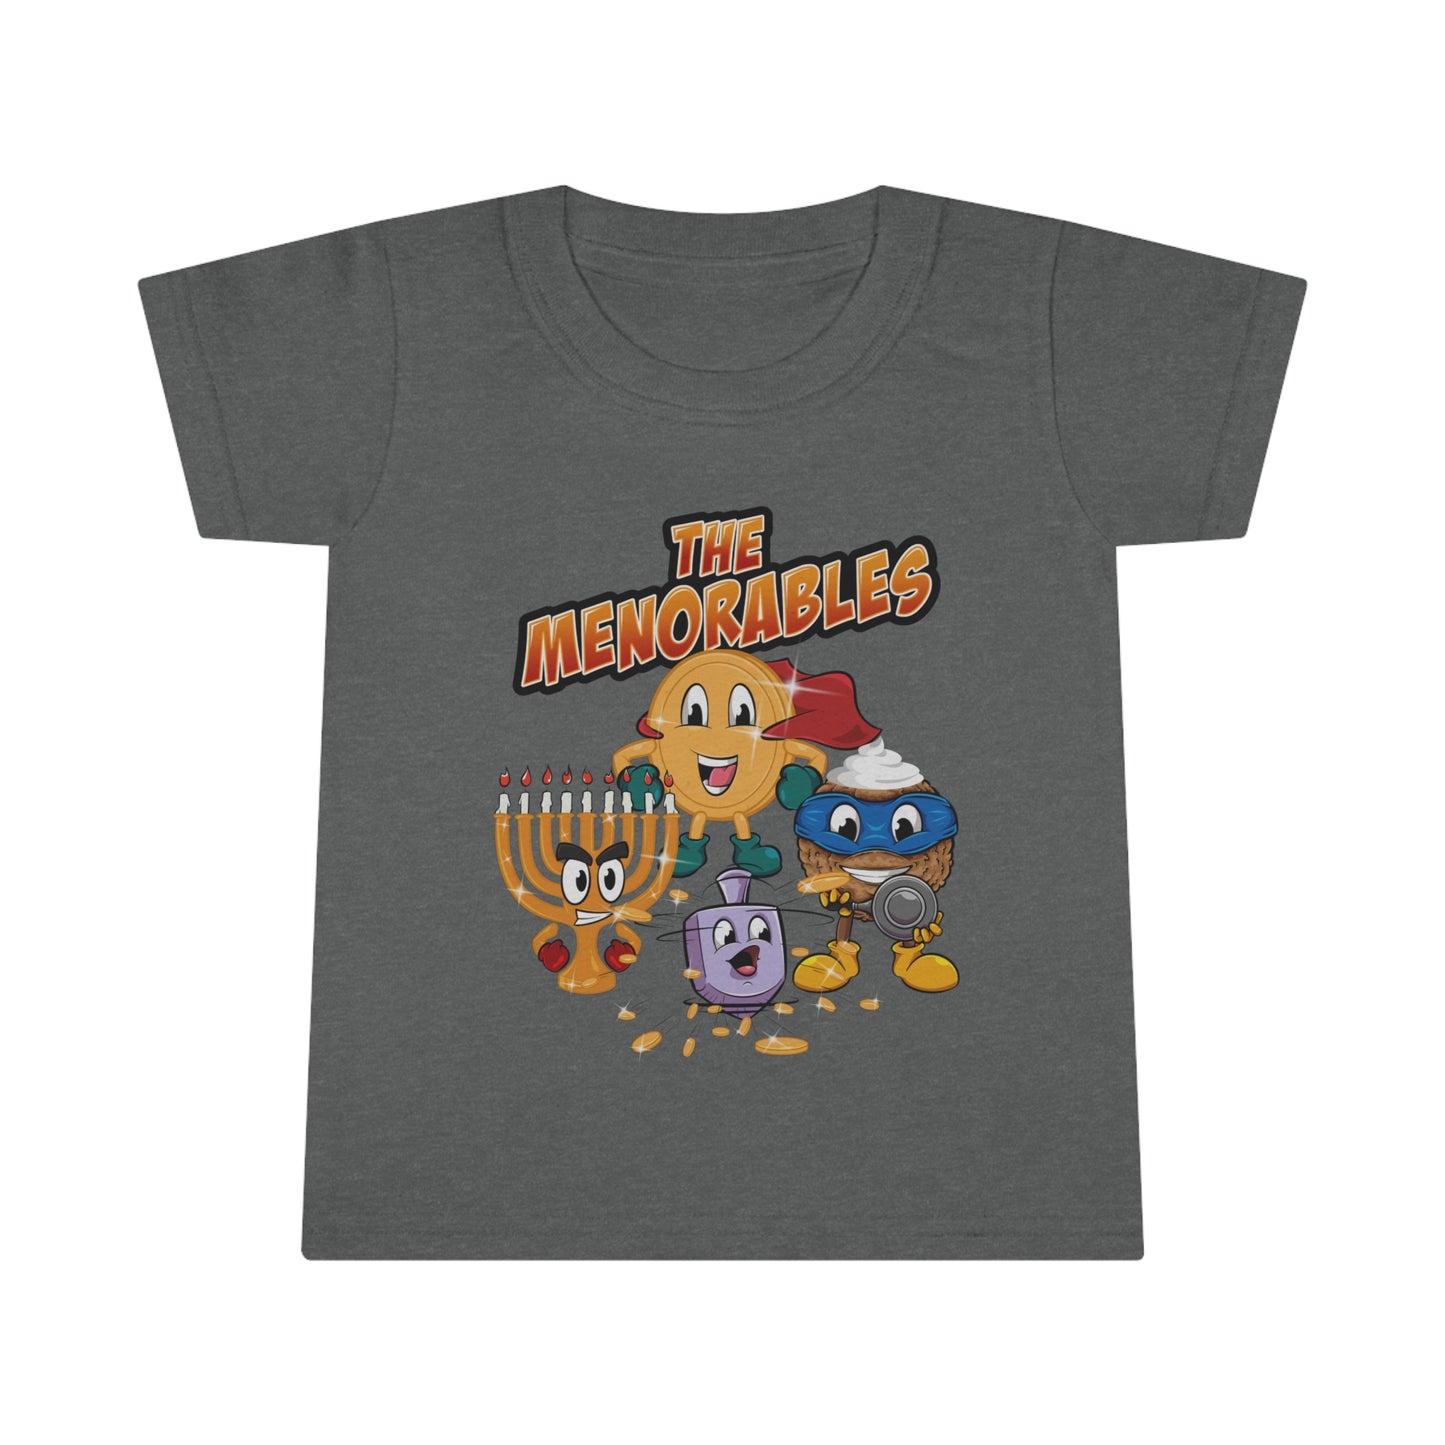 The Menorables Toddler T-shirt